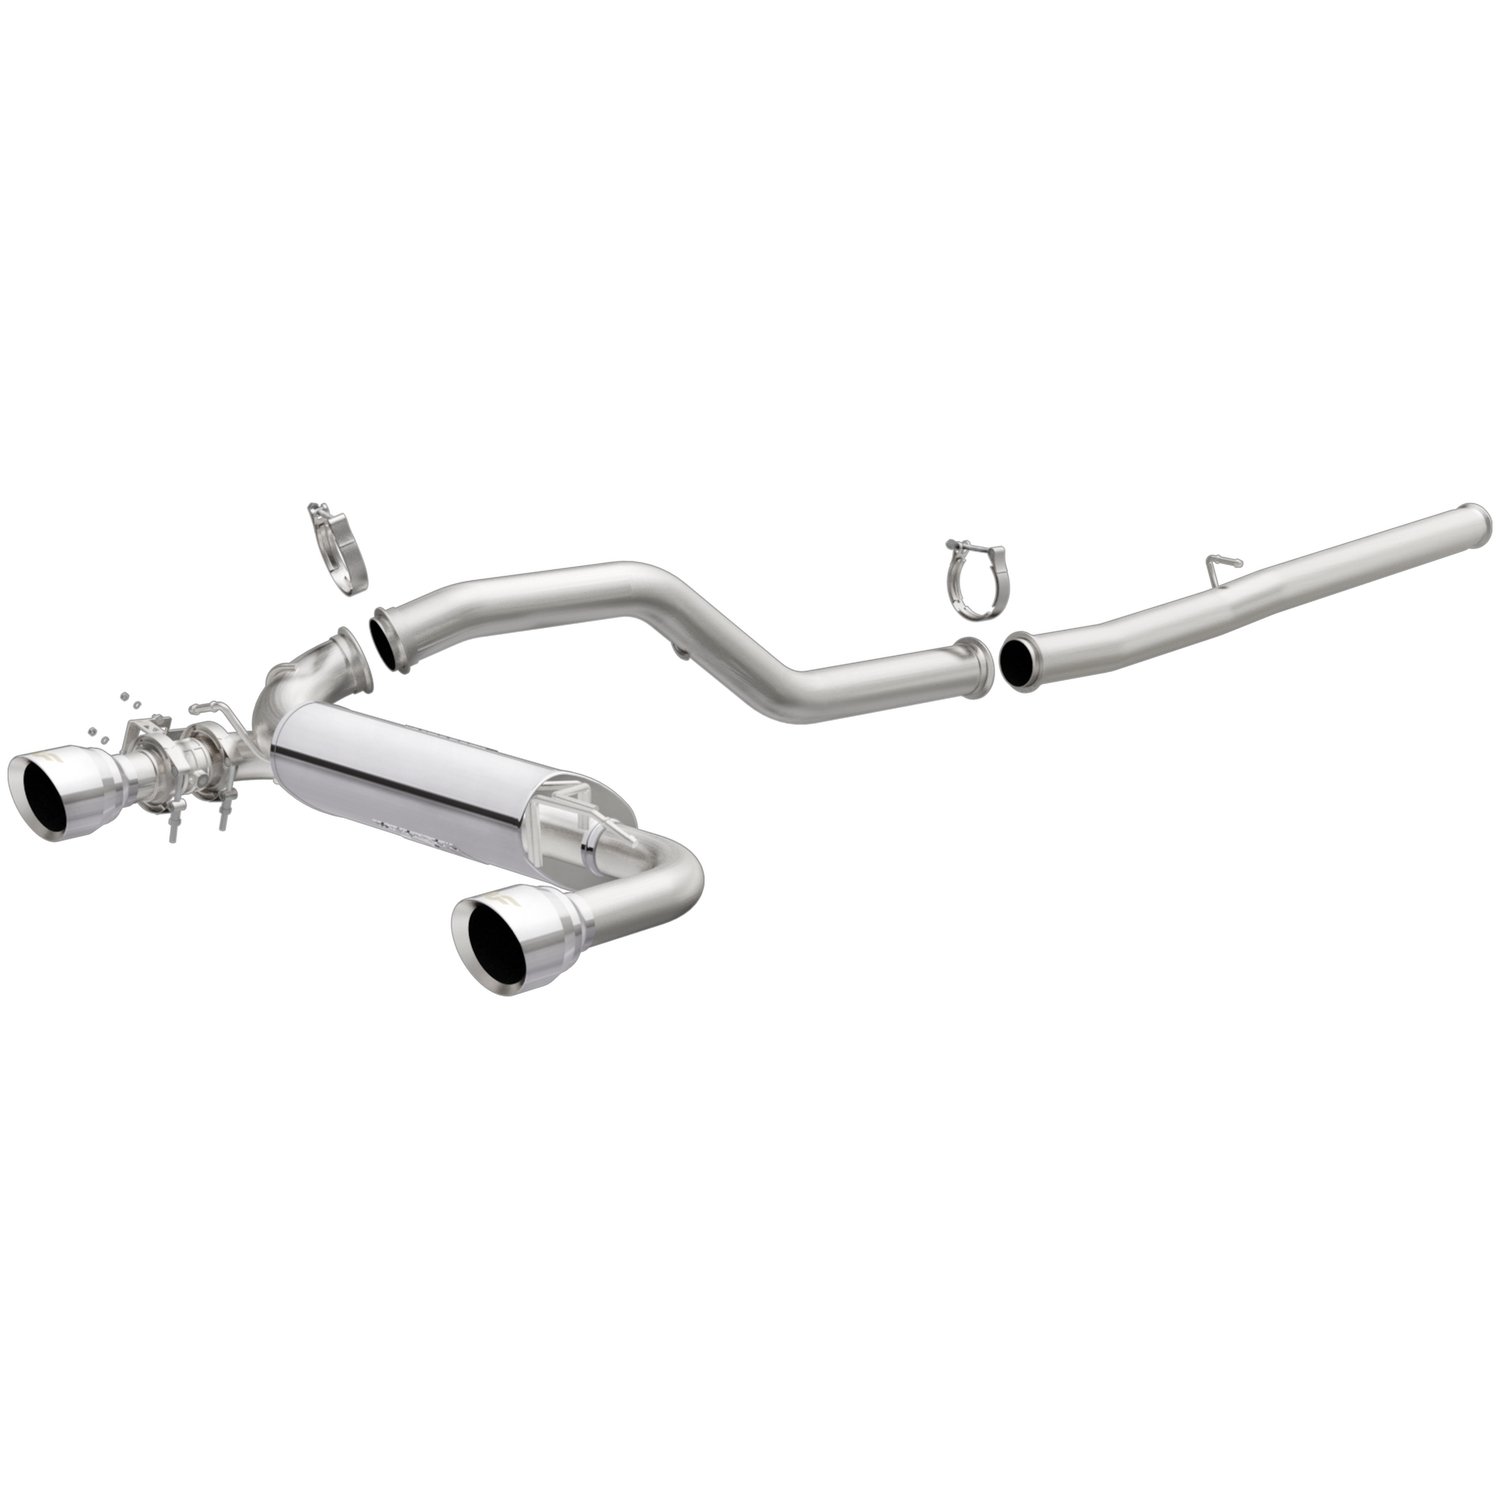 2016-2018 Ford Focus Race Series Cat-Back Performance Exhaust